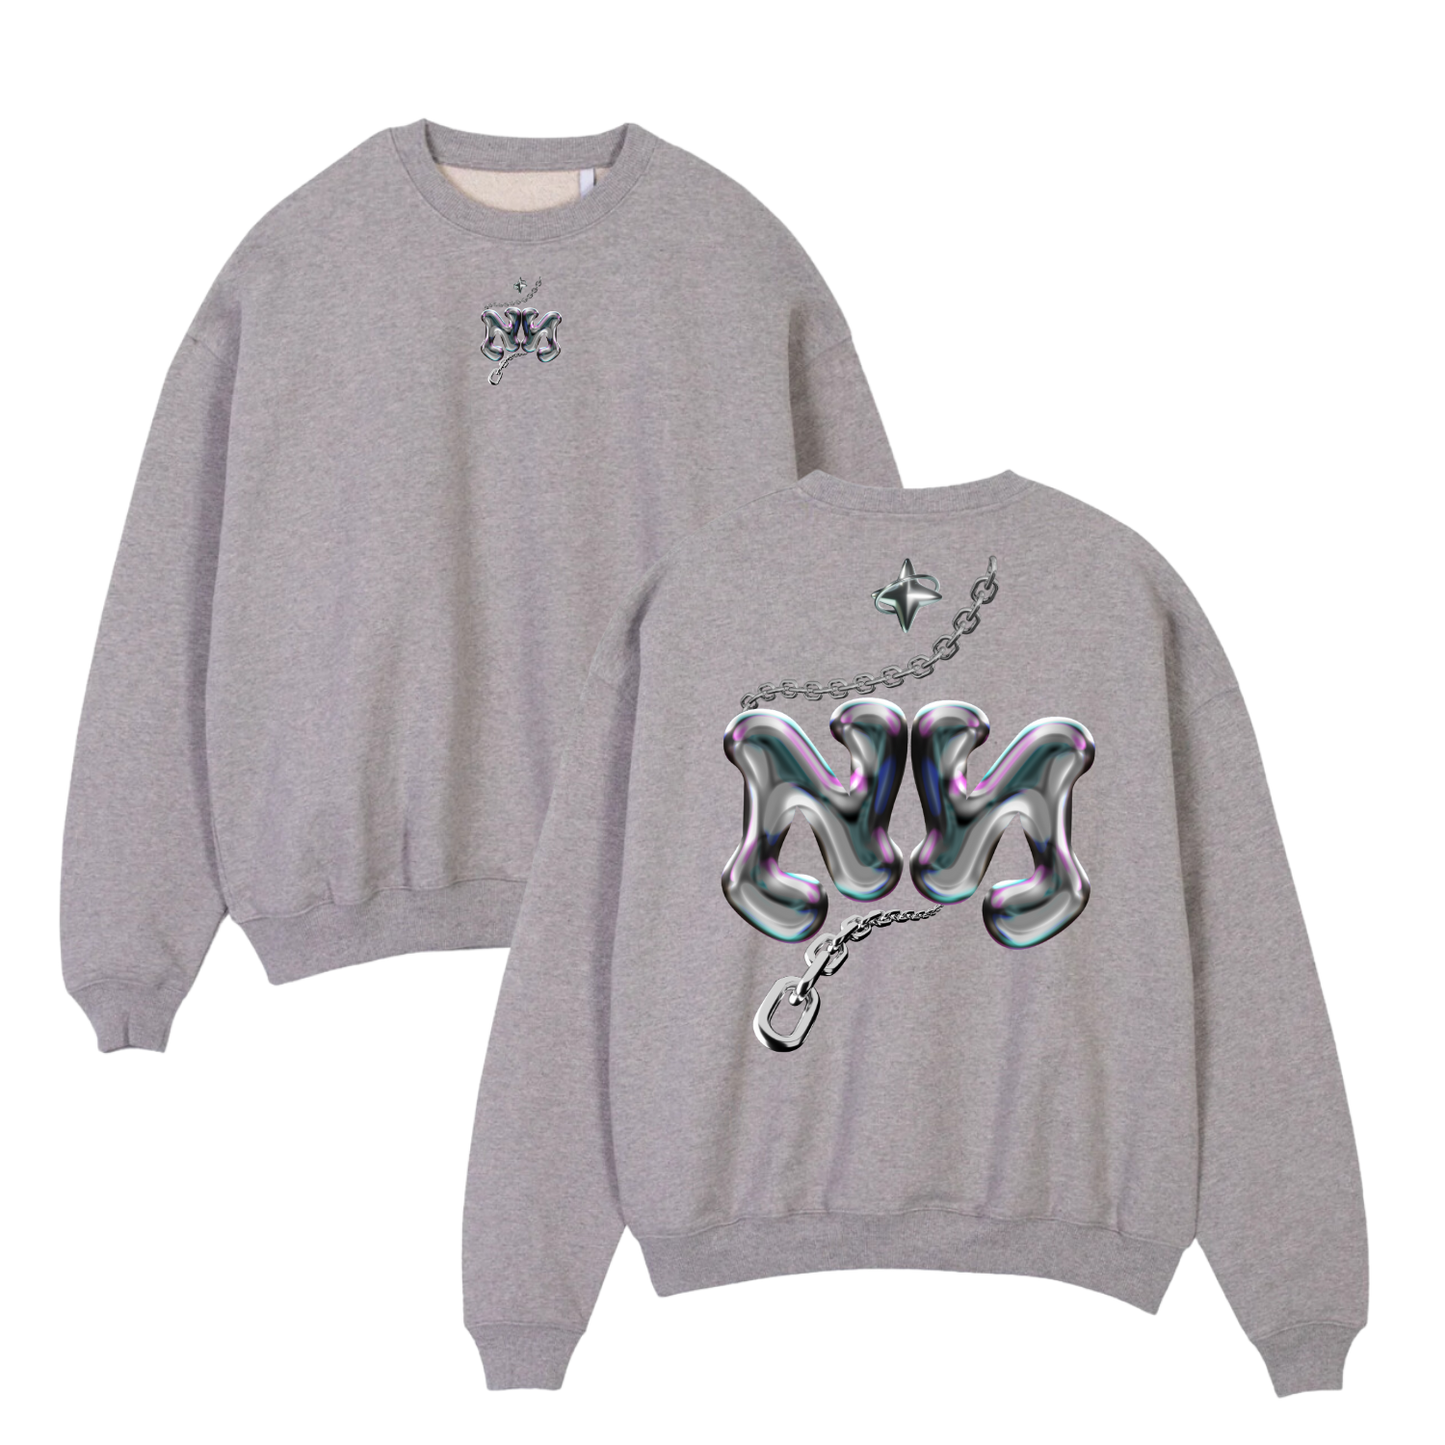 Pull Gris - Personnalisation - Yunna France